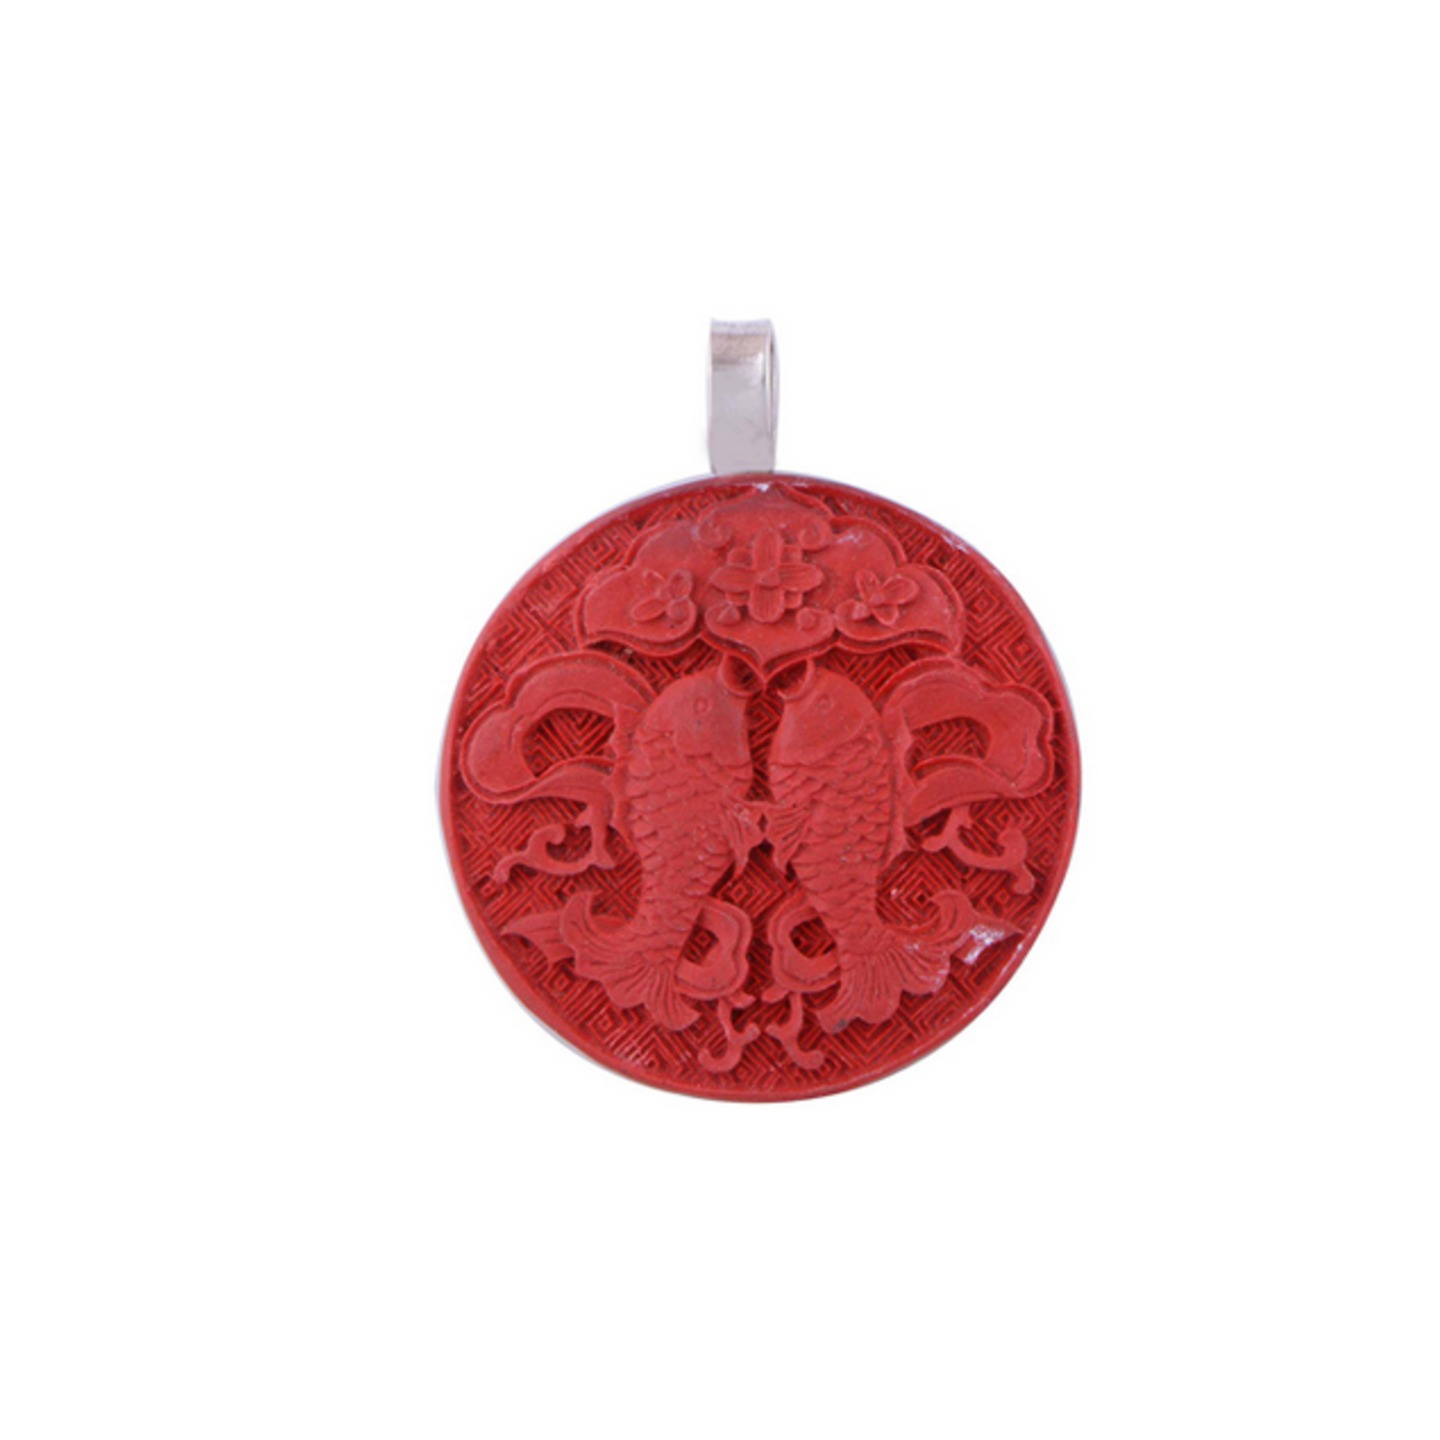 The Carved Manmade Stone Silver Pendant